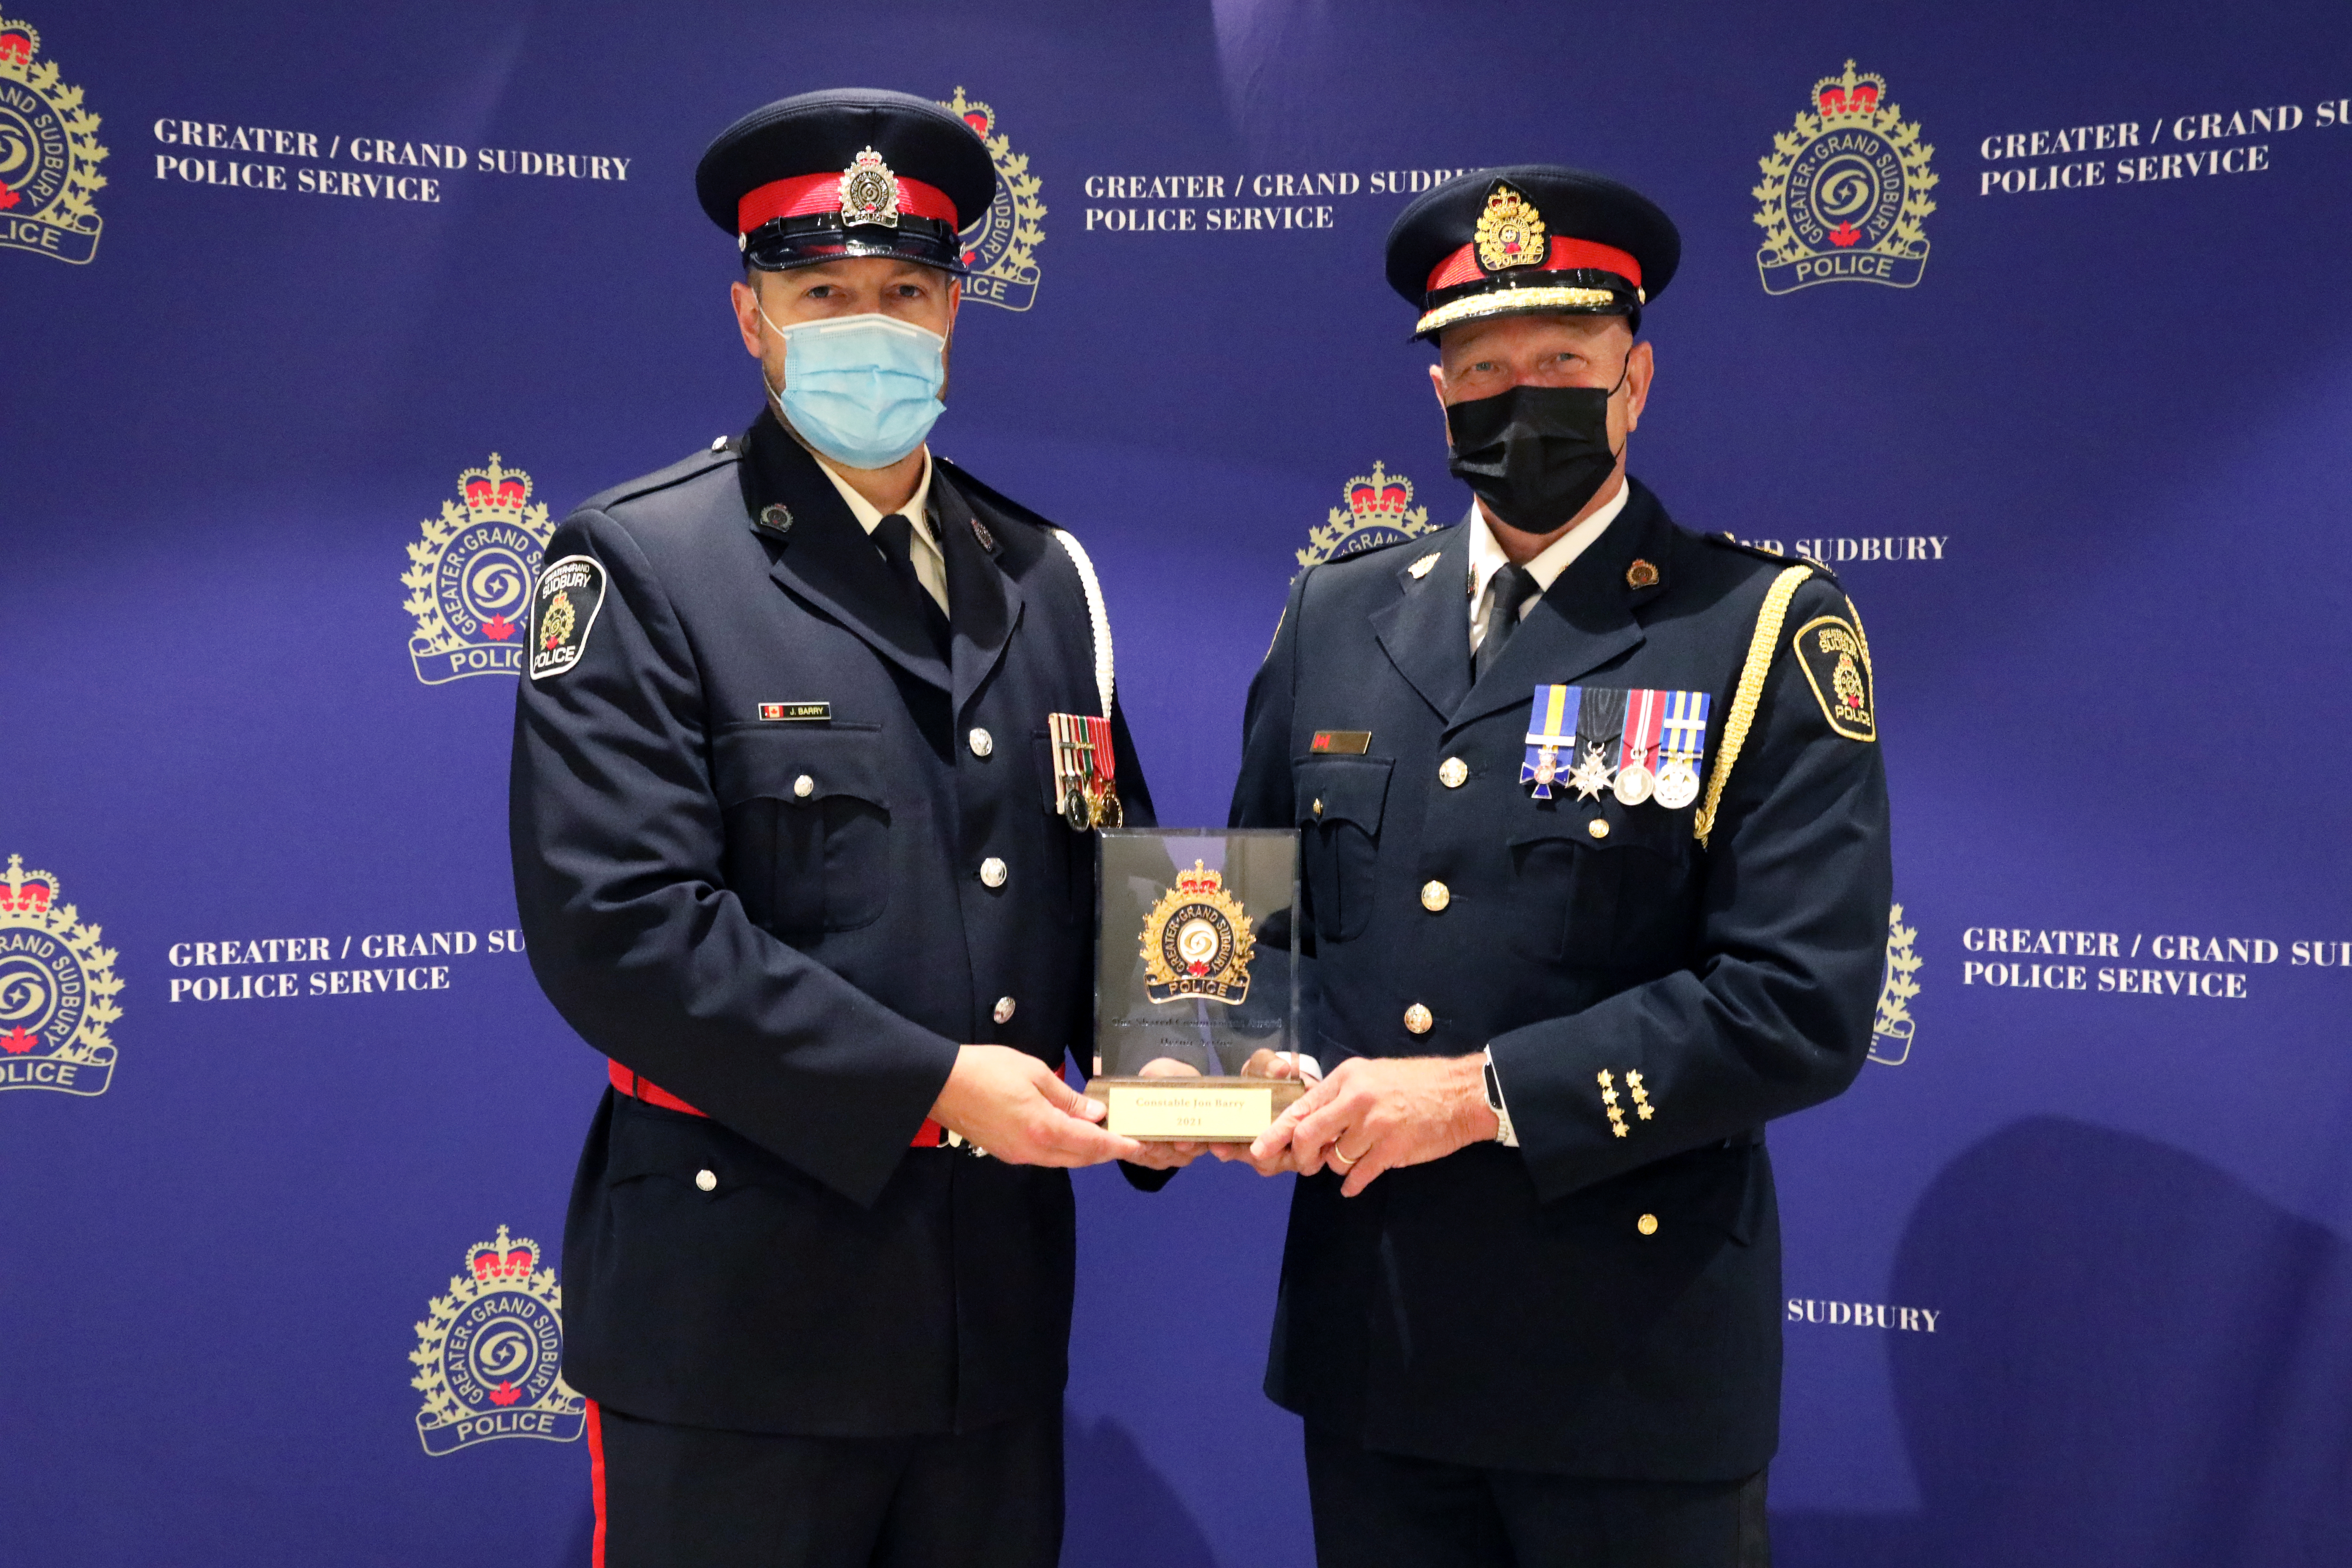 Police Officer and Chief holding award